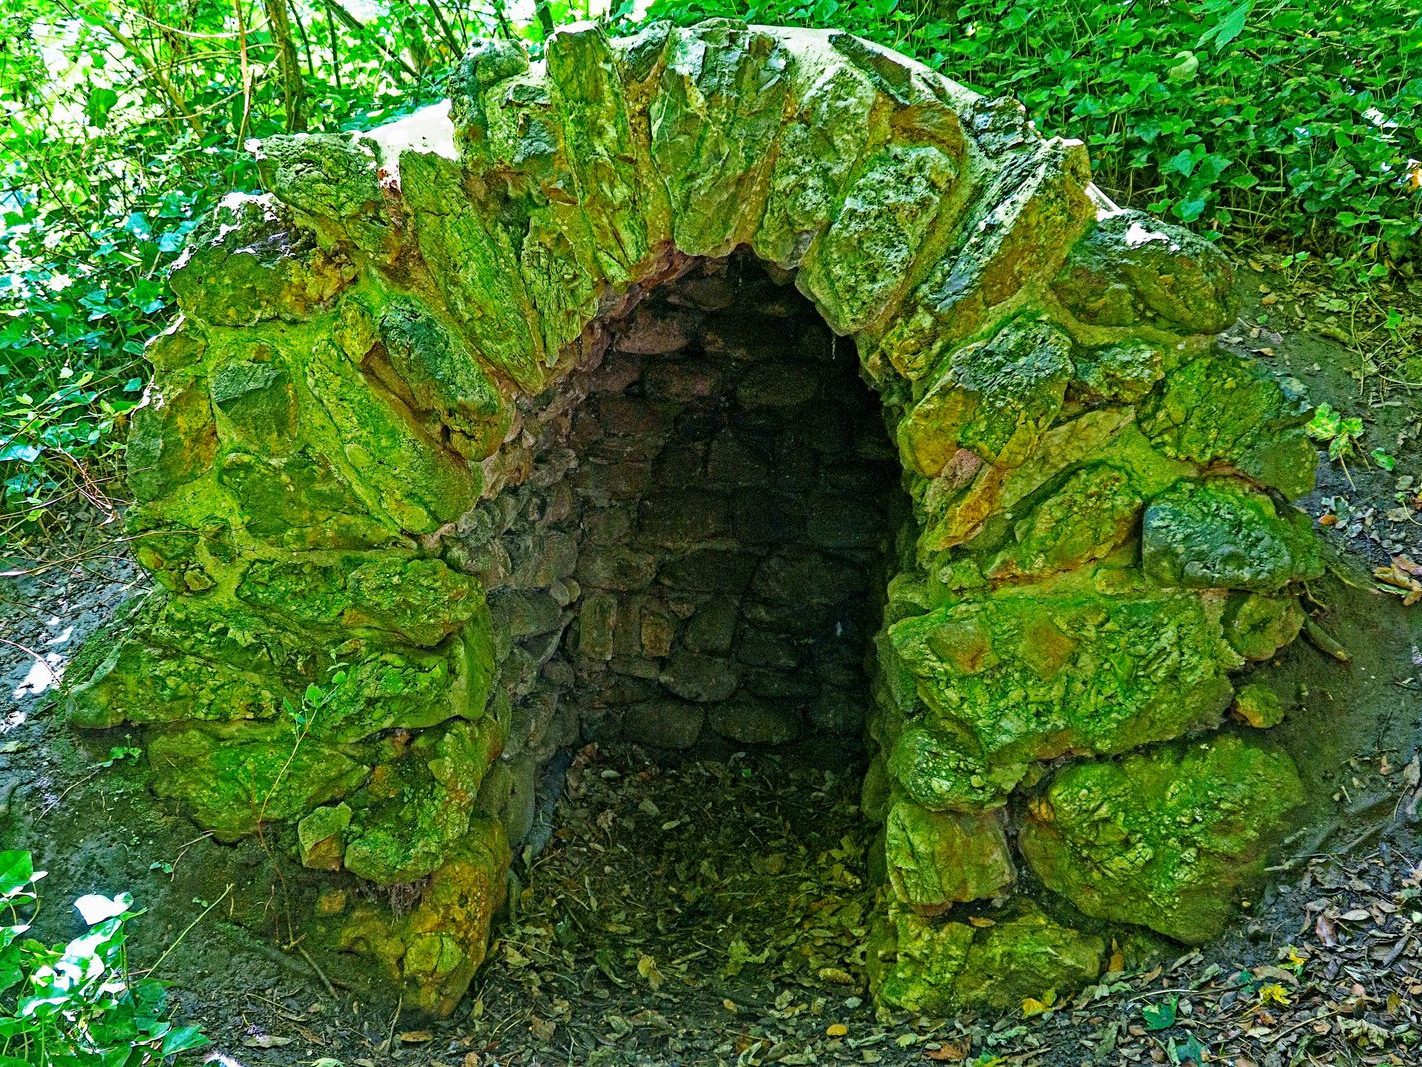 ST ANN'S WELL AT ST ANNE'S PARK [A HOLY WELL NOW DESCRIBED AS A WISHING WELL] 007